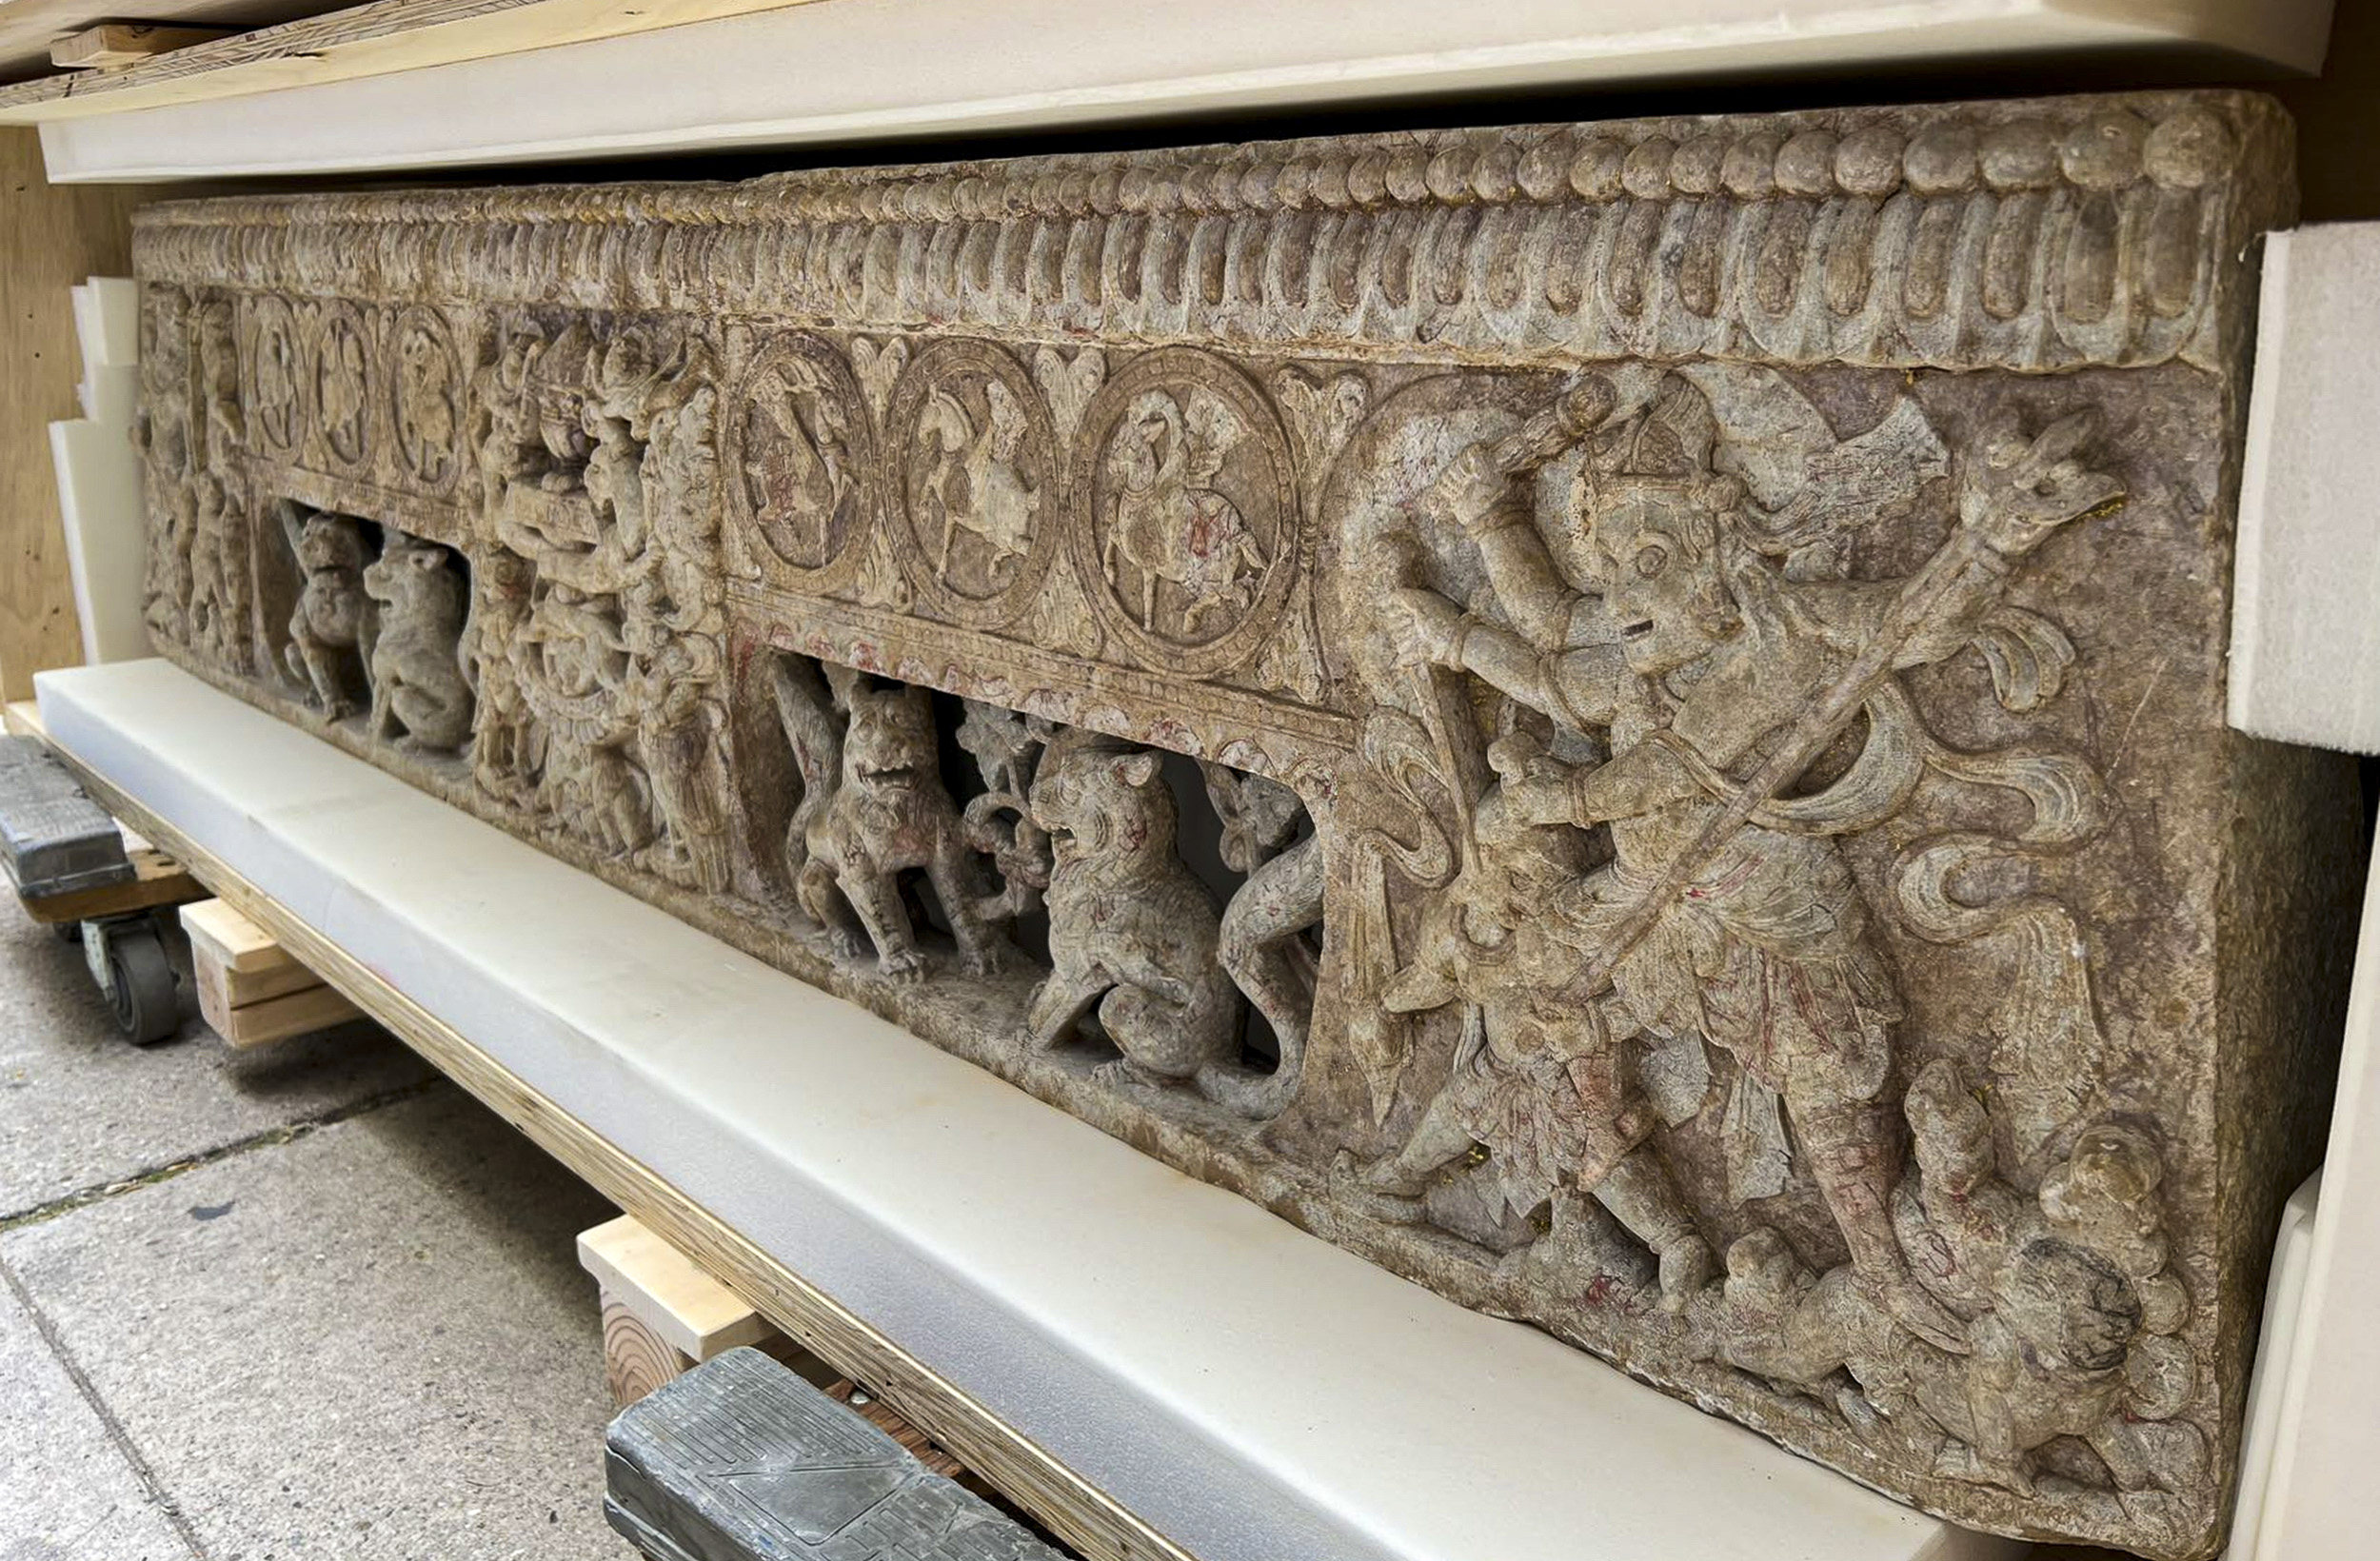 Two stone carvings were presented to the Chinese consulate in New York, after an investigation found they were stolen from a tomb in the 1990s and smuggled out of China. Photo: Twitter/@CGHuangPingNY